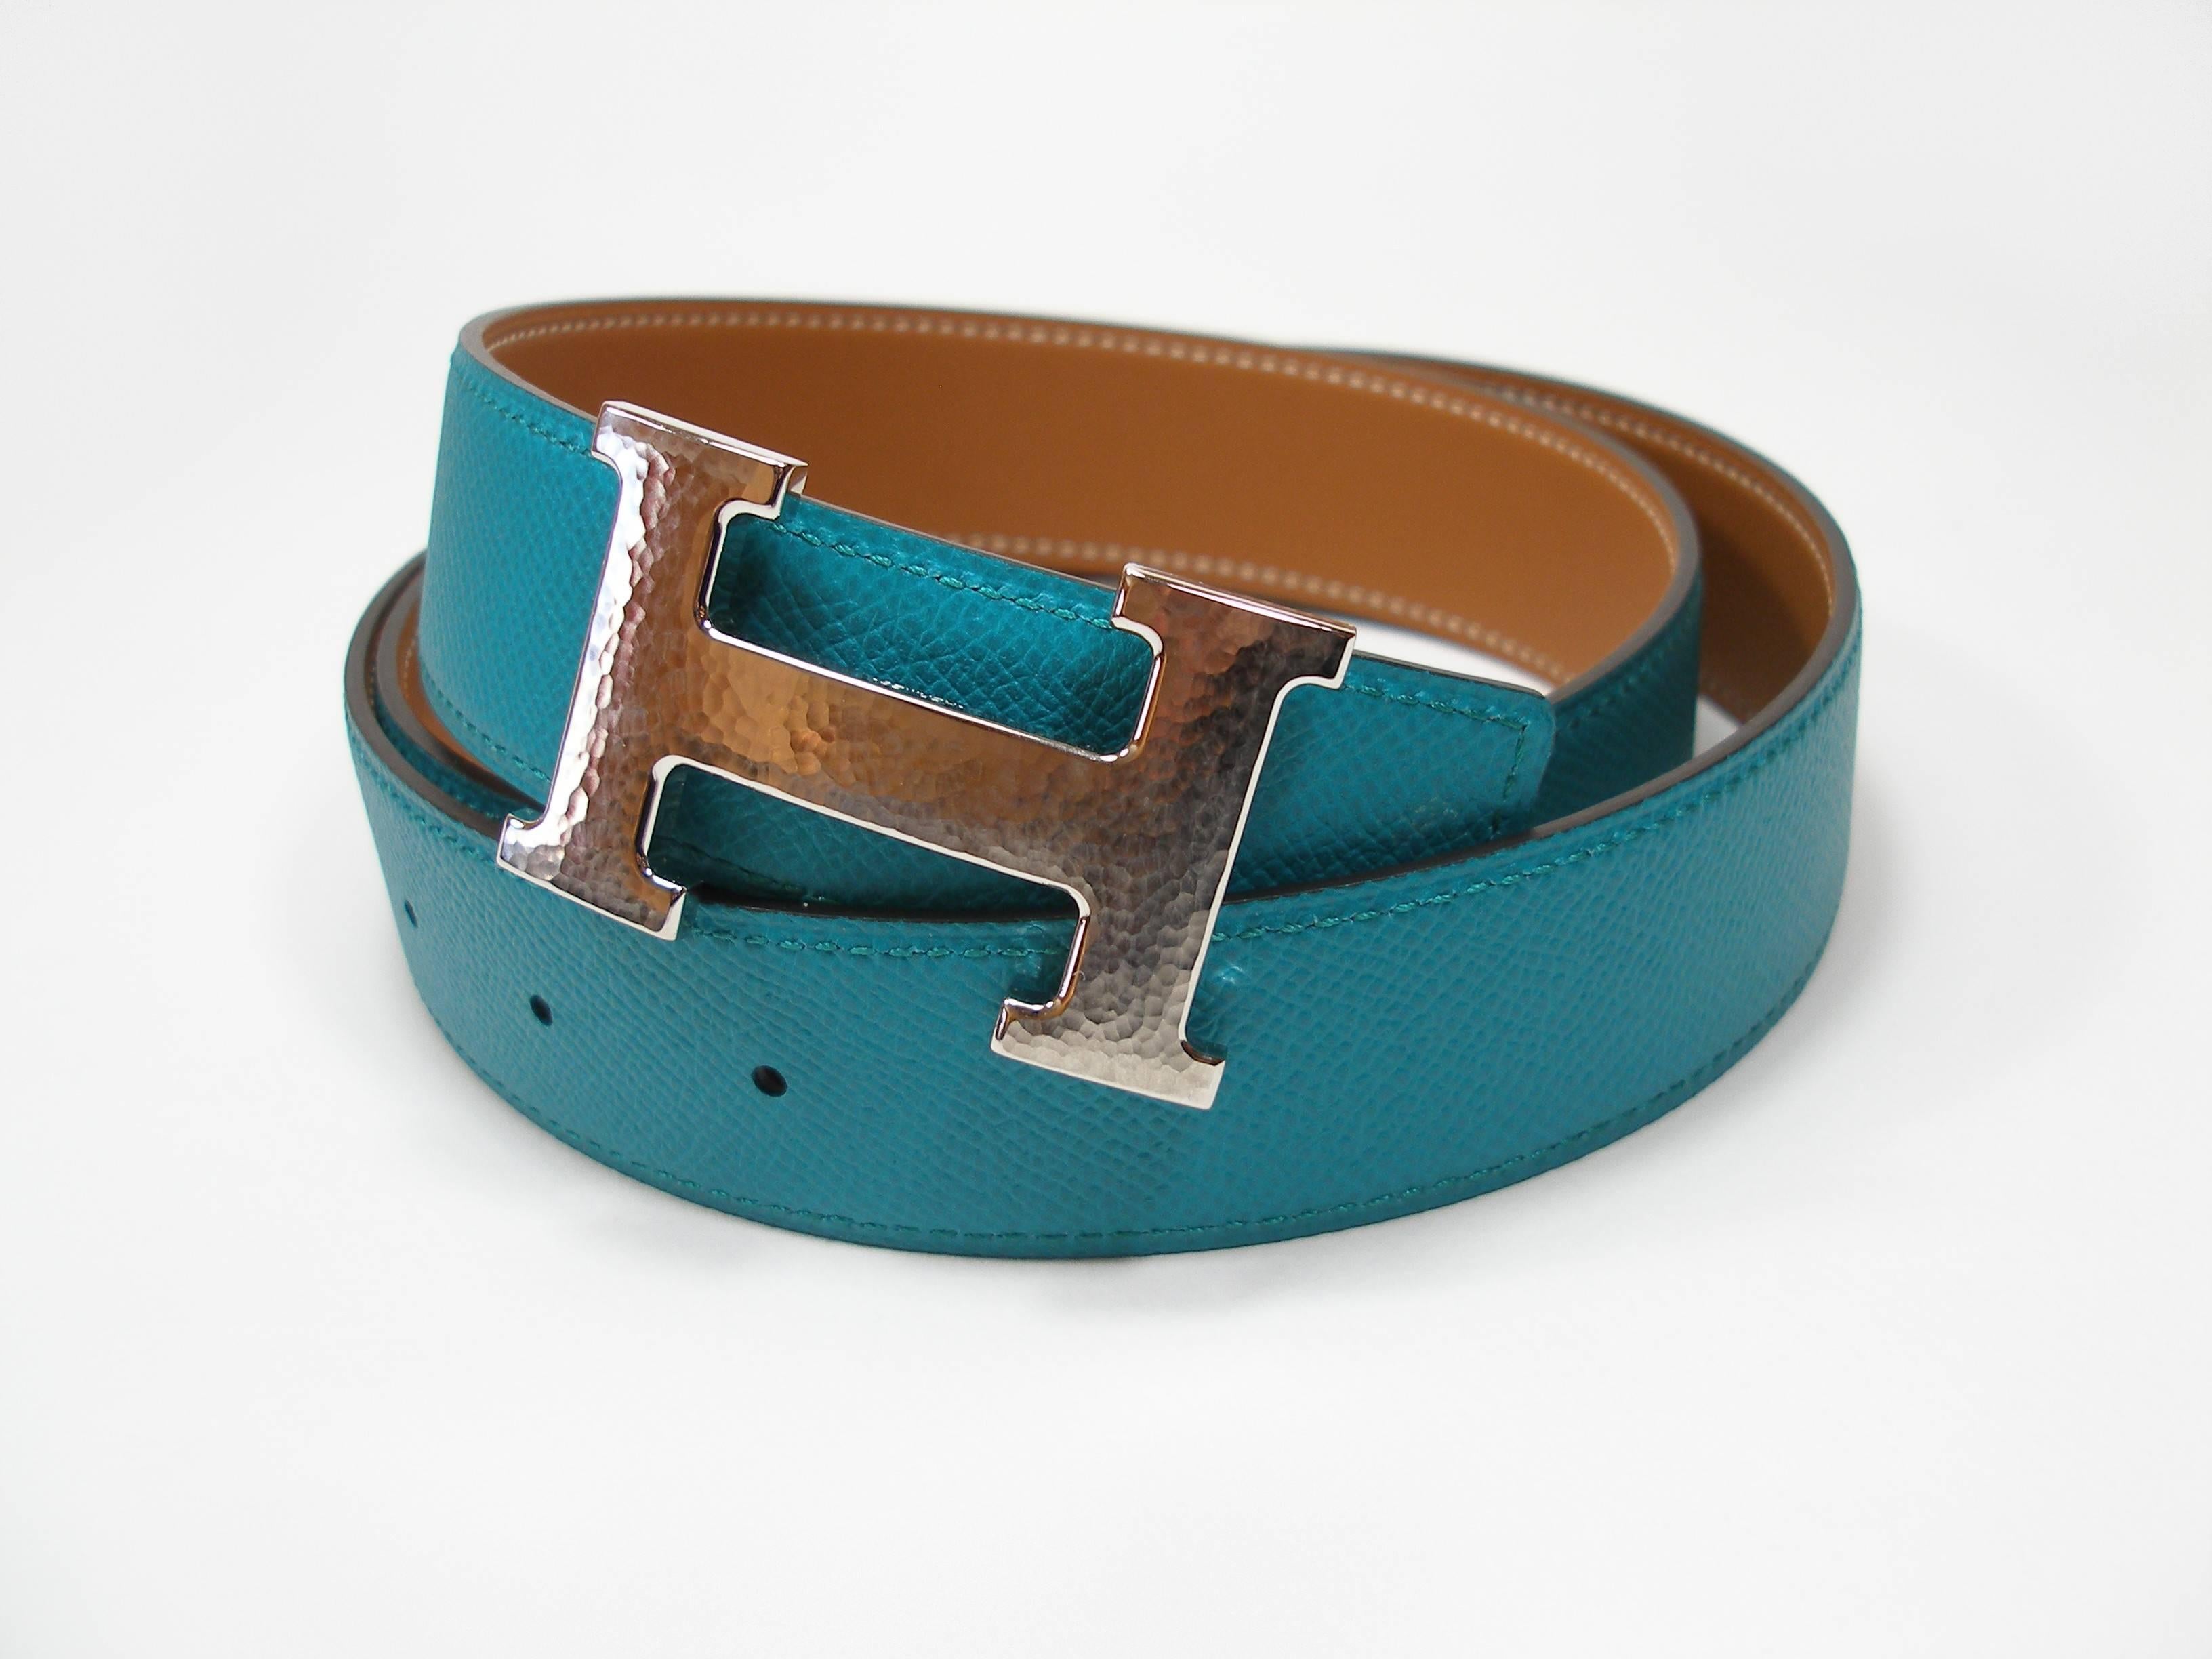 CLASSIQUE and INTEMPOREL 
Hermès 32mm belt in classic Gold / Bleu Paon Barenia /Epsom calfskin leather strap with silver H Constance Martelé 
Stamp  : X 
Size : 90 cm 
Its comes with Hermès box and ribbon for XMAS
Retail price : 870 usd